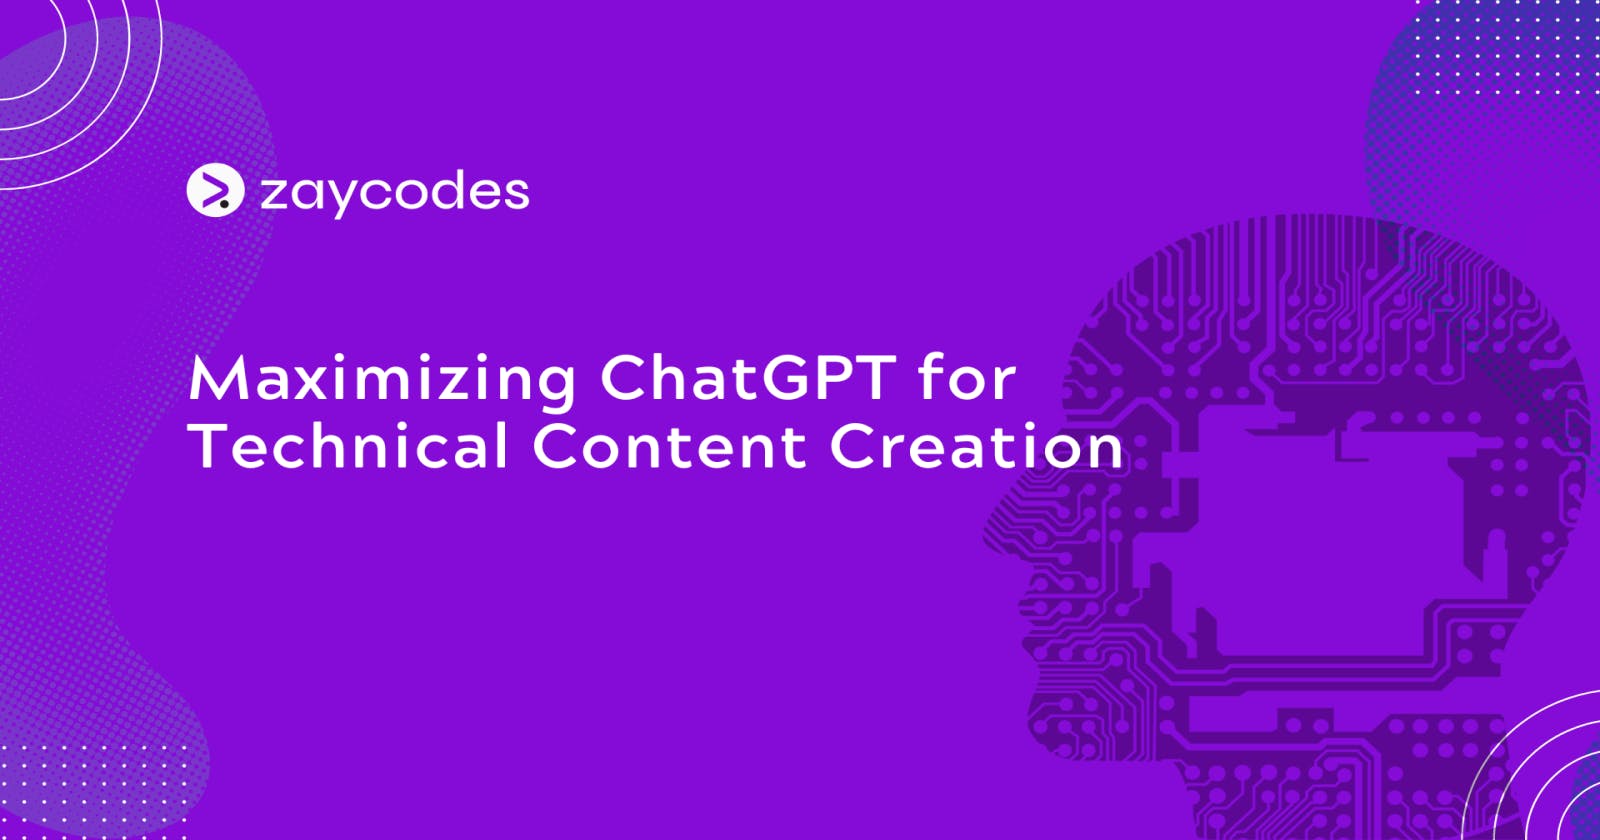 Maximizing ChatGPT for Technical Content Creation